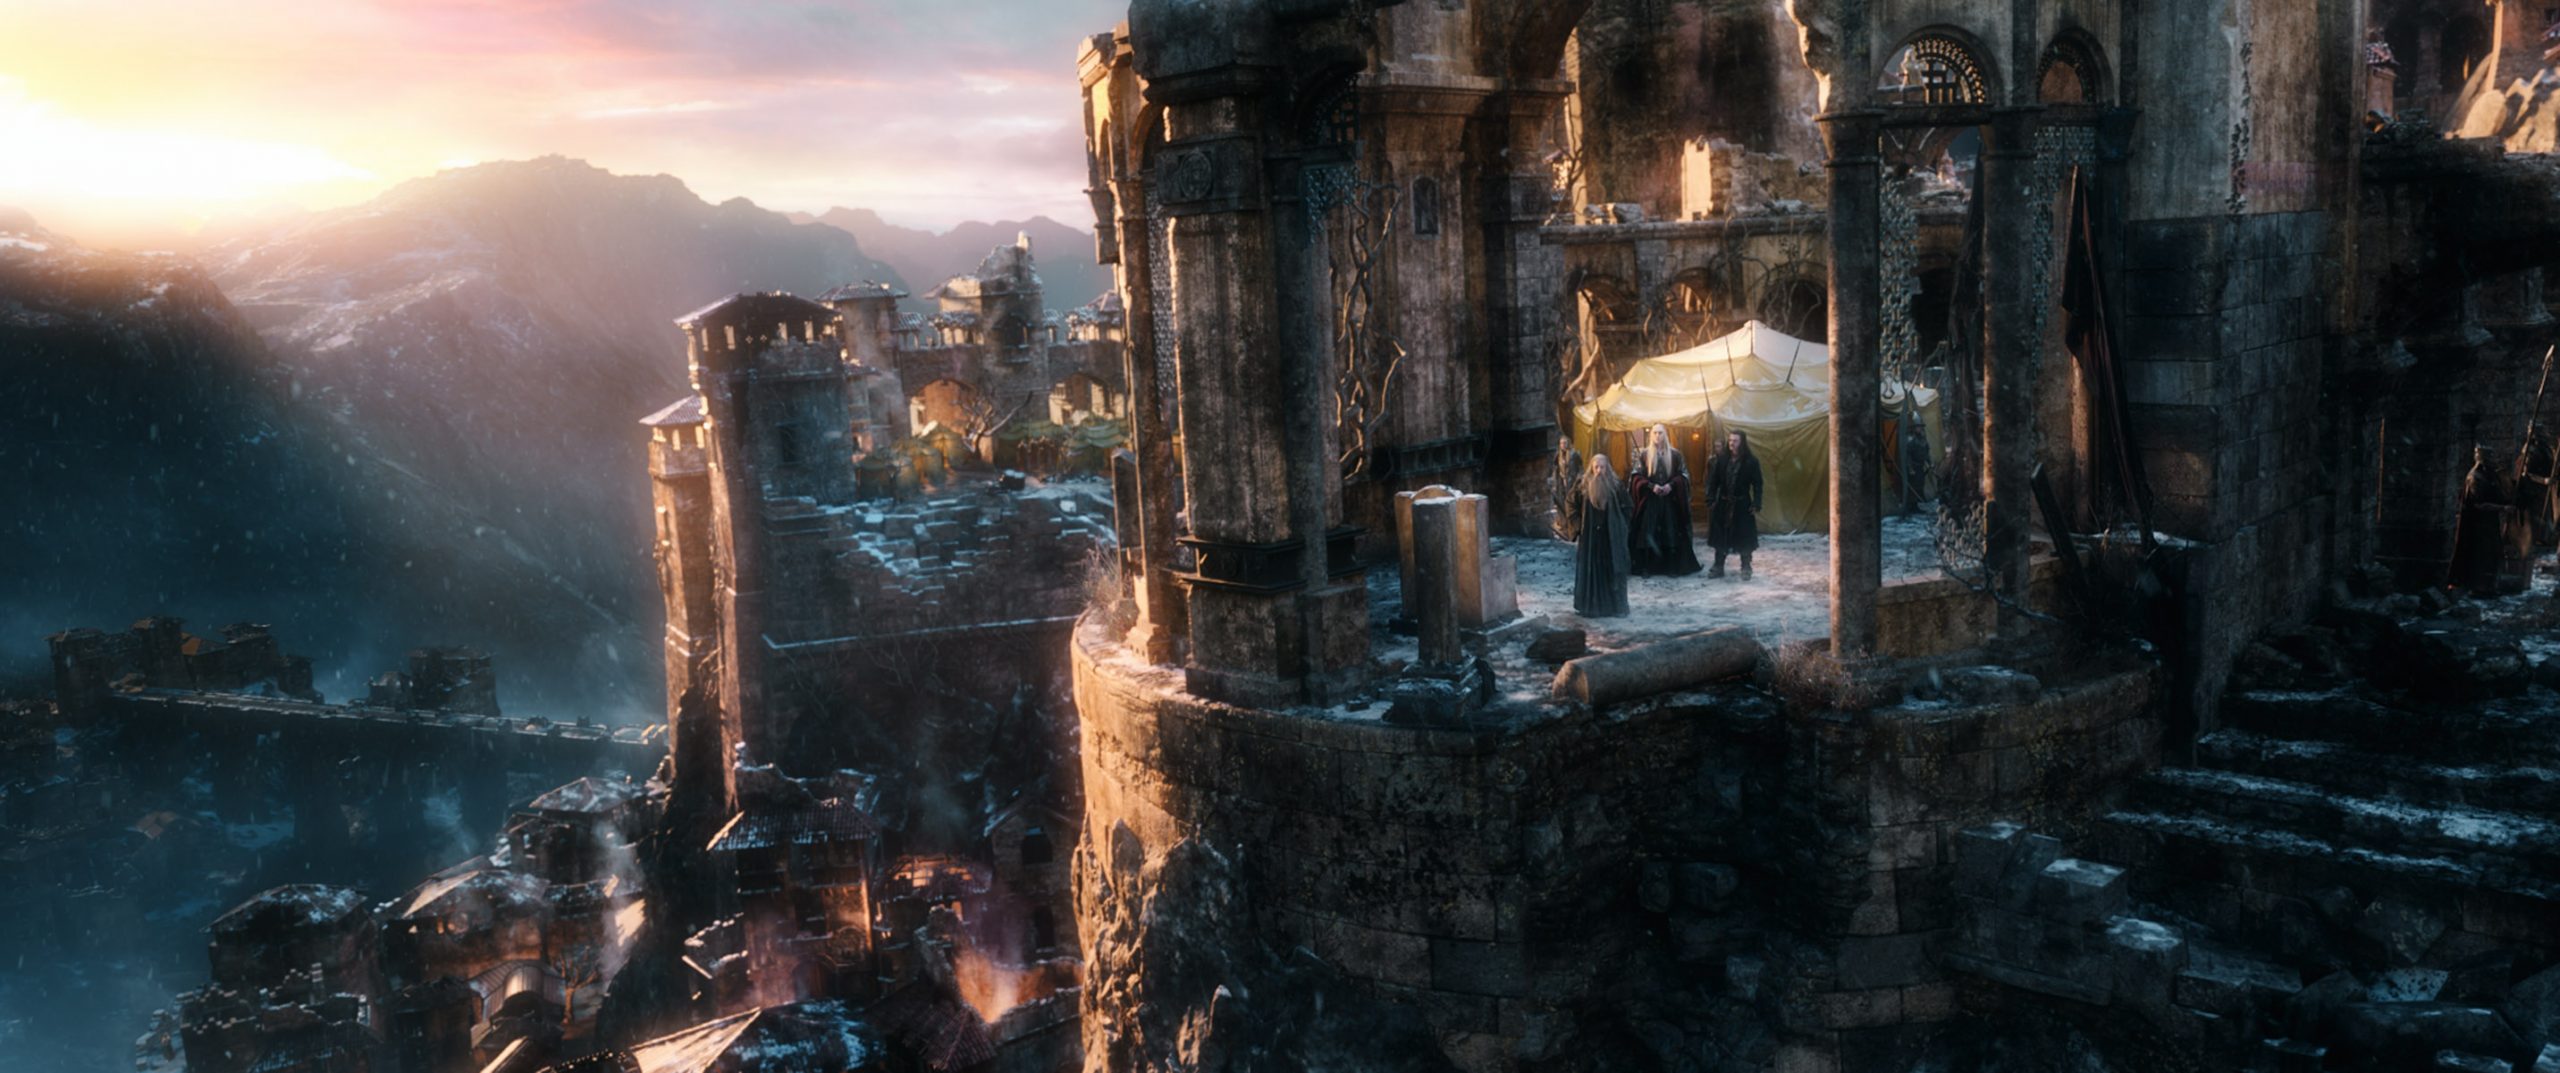 The Hobbit: The Battle Of The Five Armies (2014) Review 4